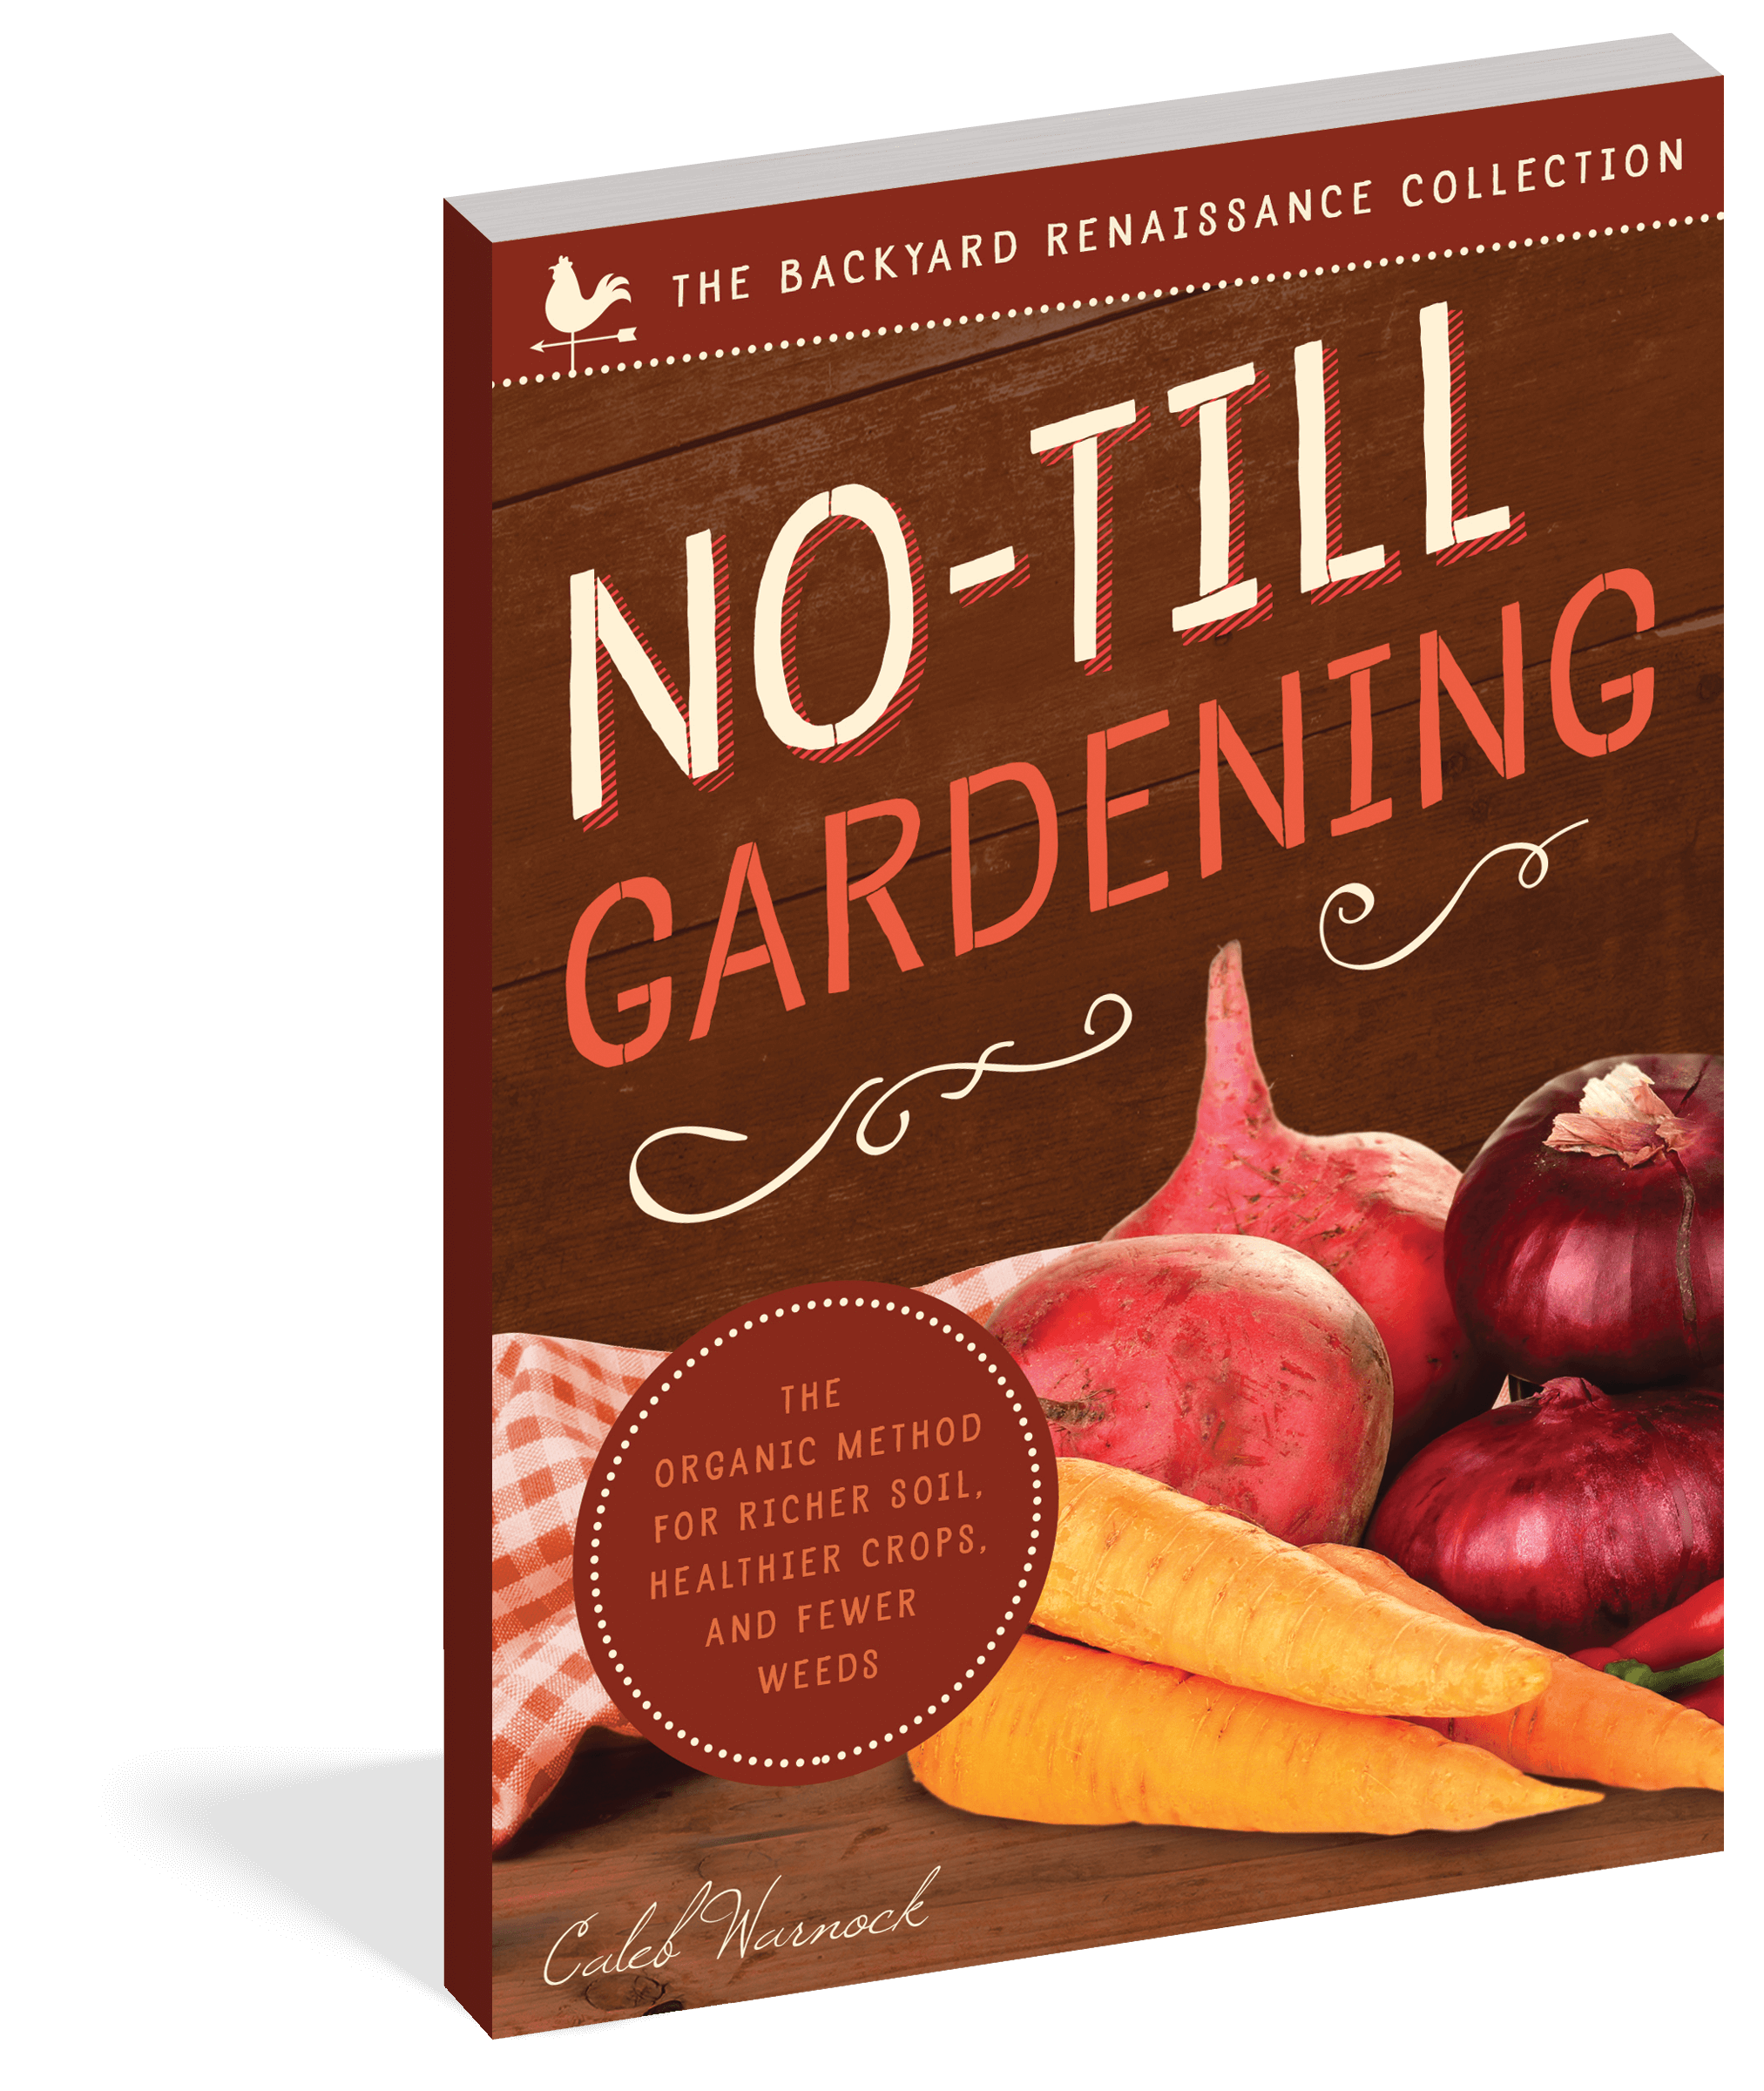 The cover of the book No-Till Gardening.